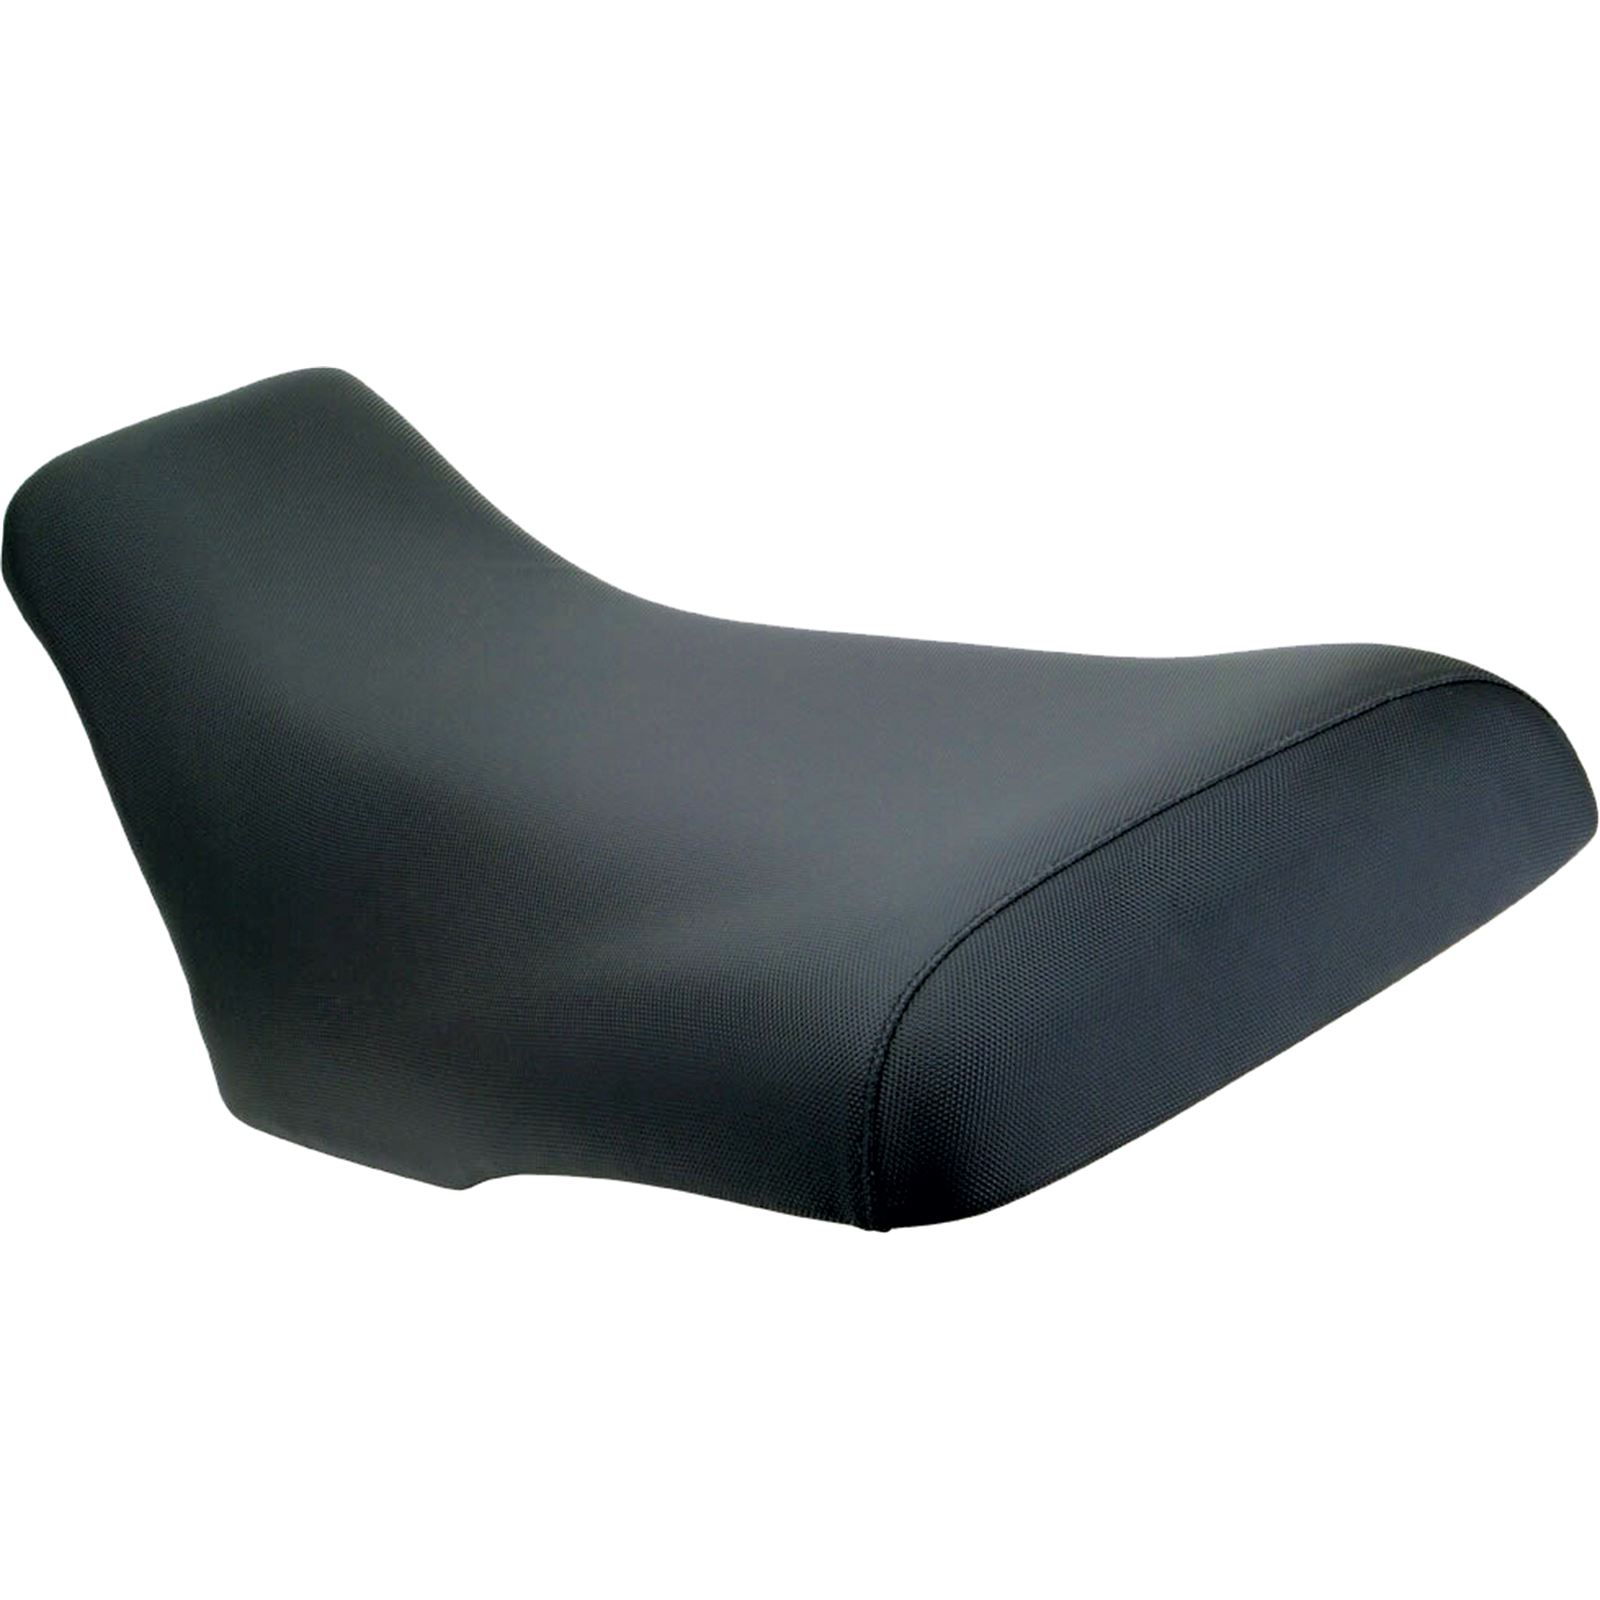 Quad Works Gripper Seat Cover